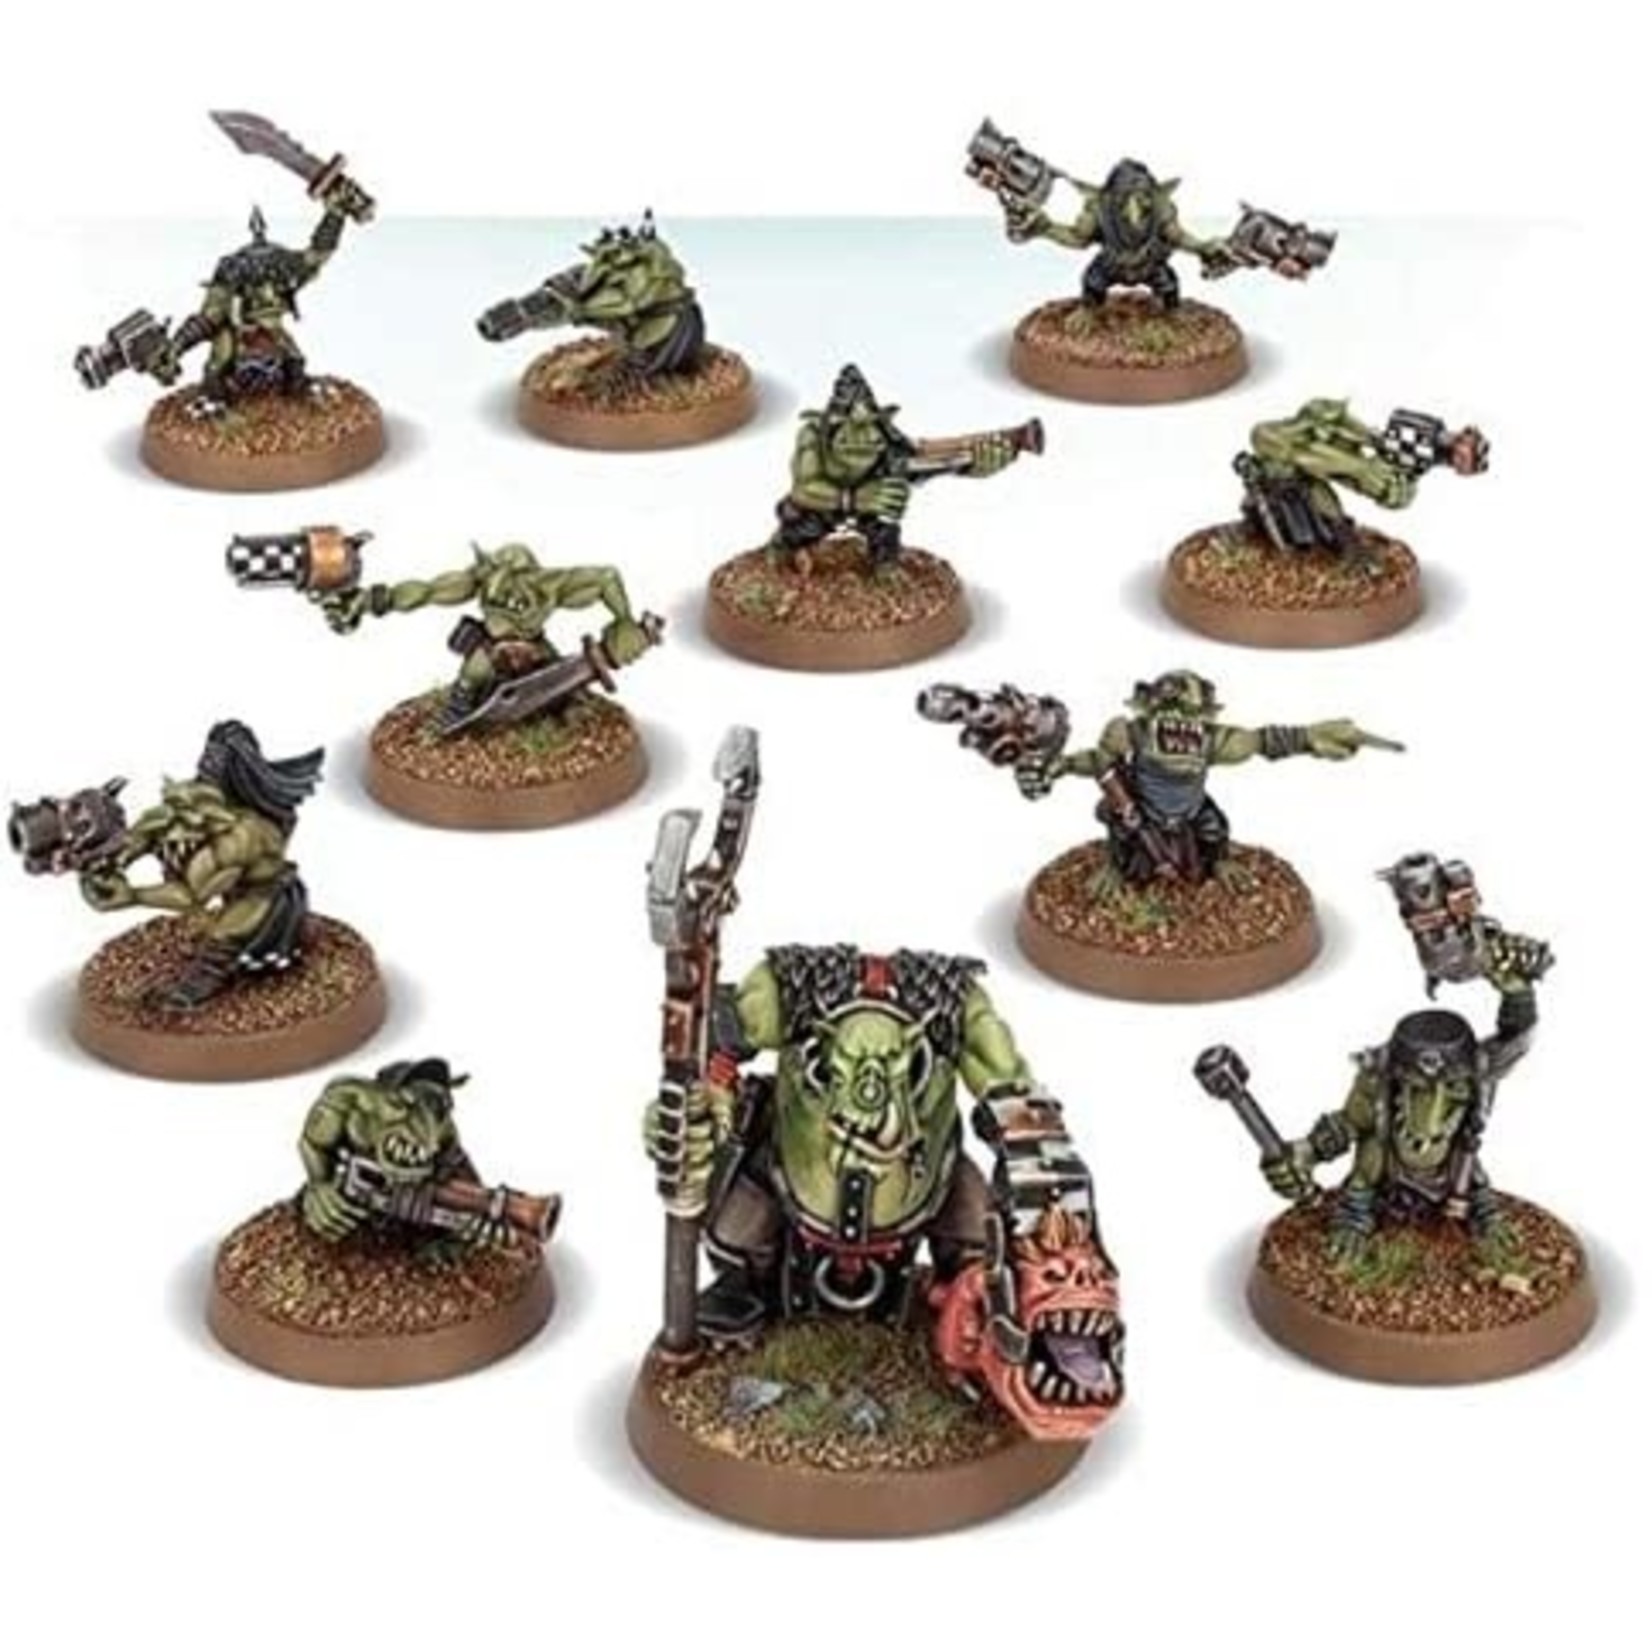 Games Workshop Orks: Runtherd and Gretchin